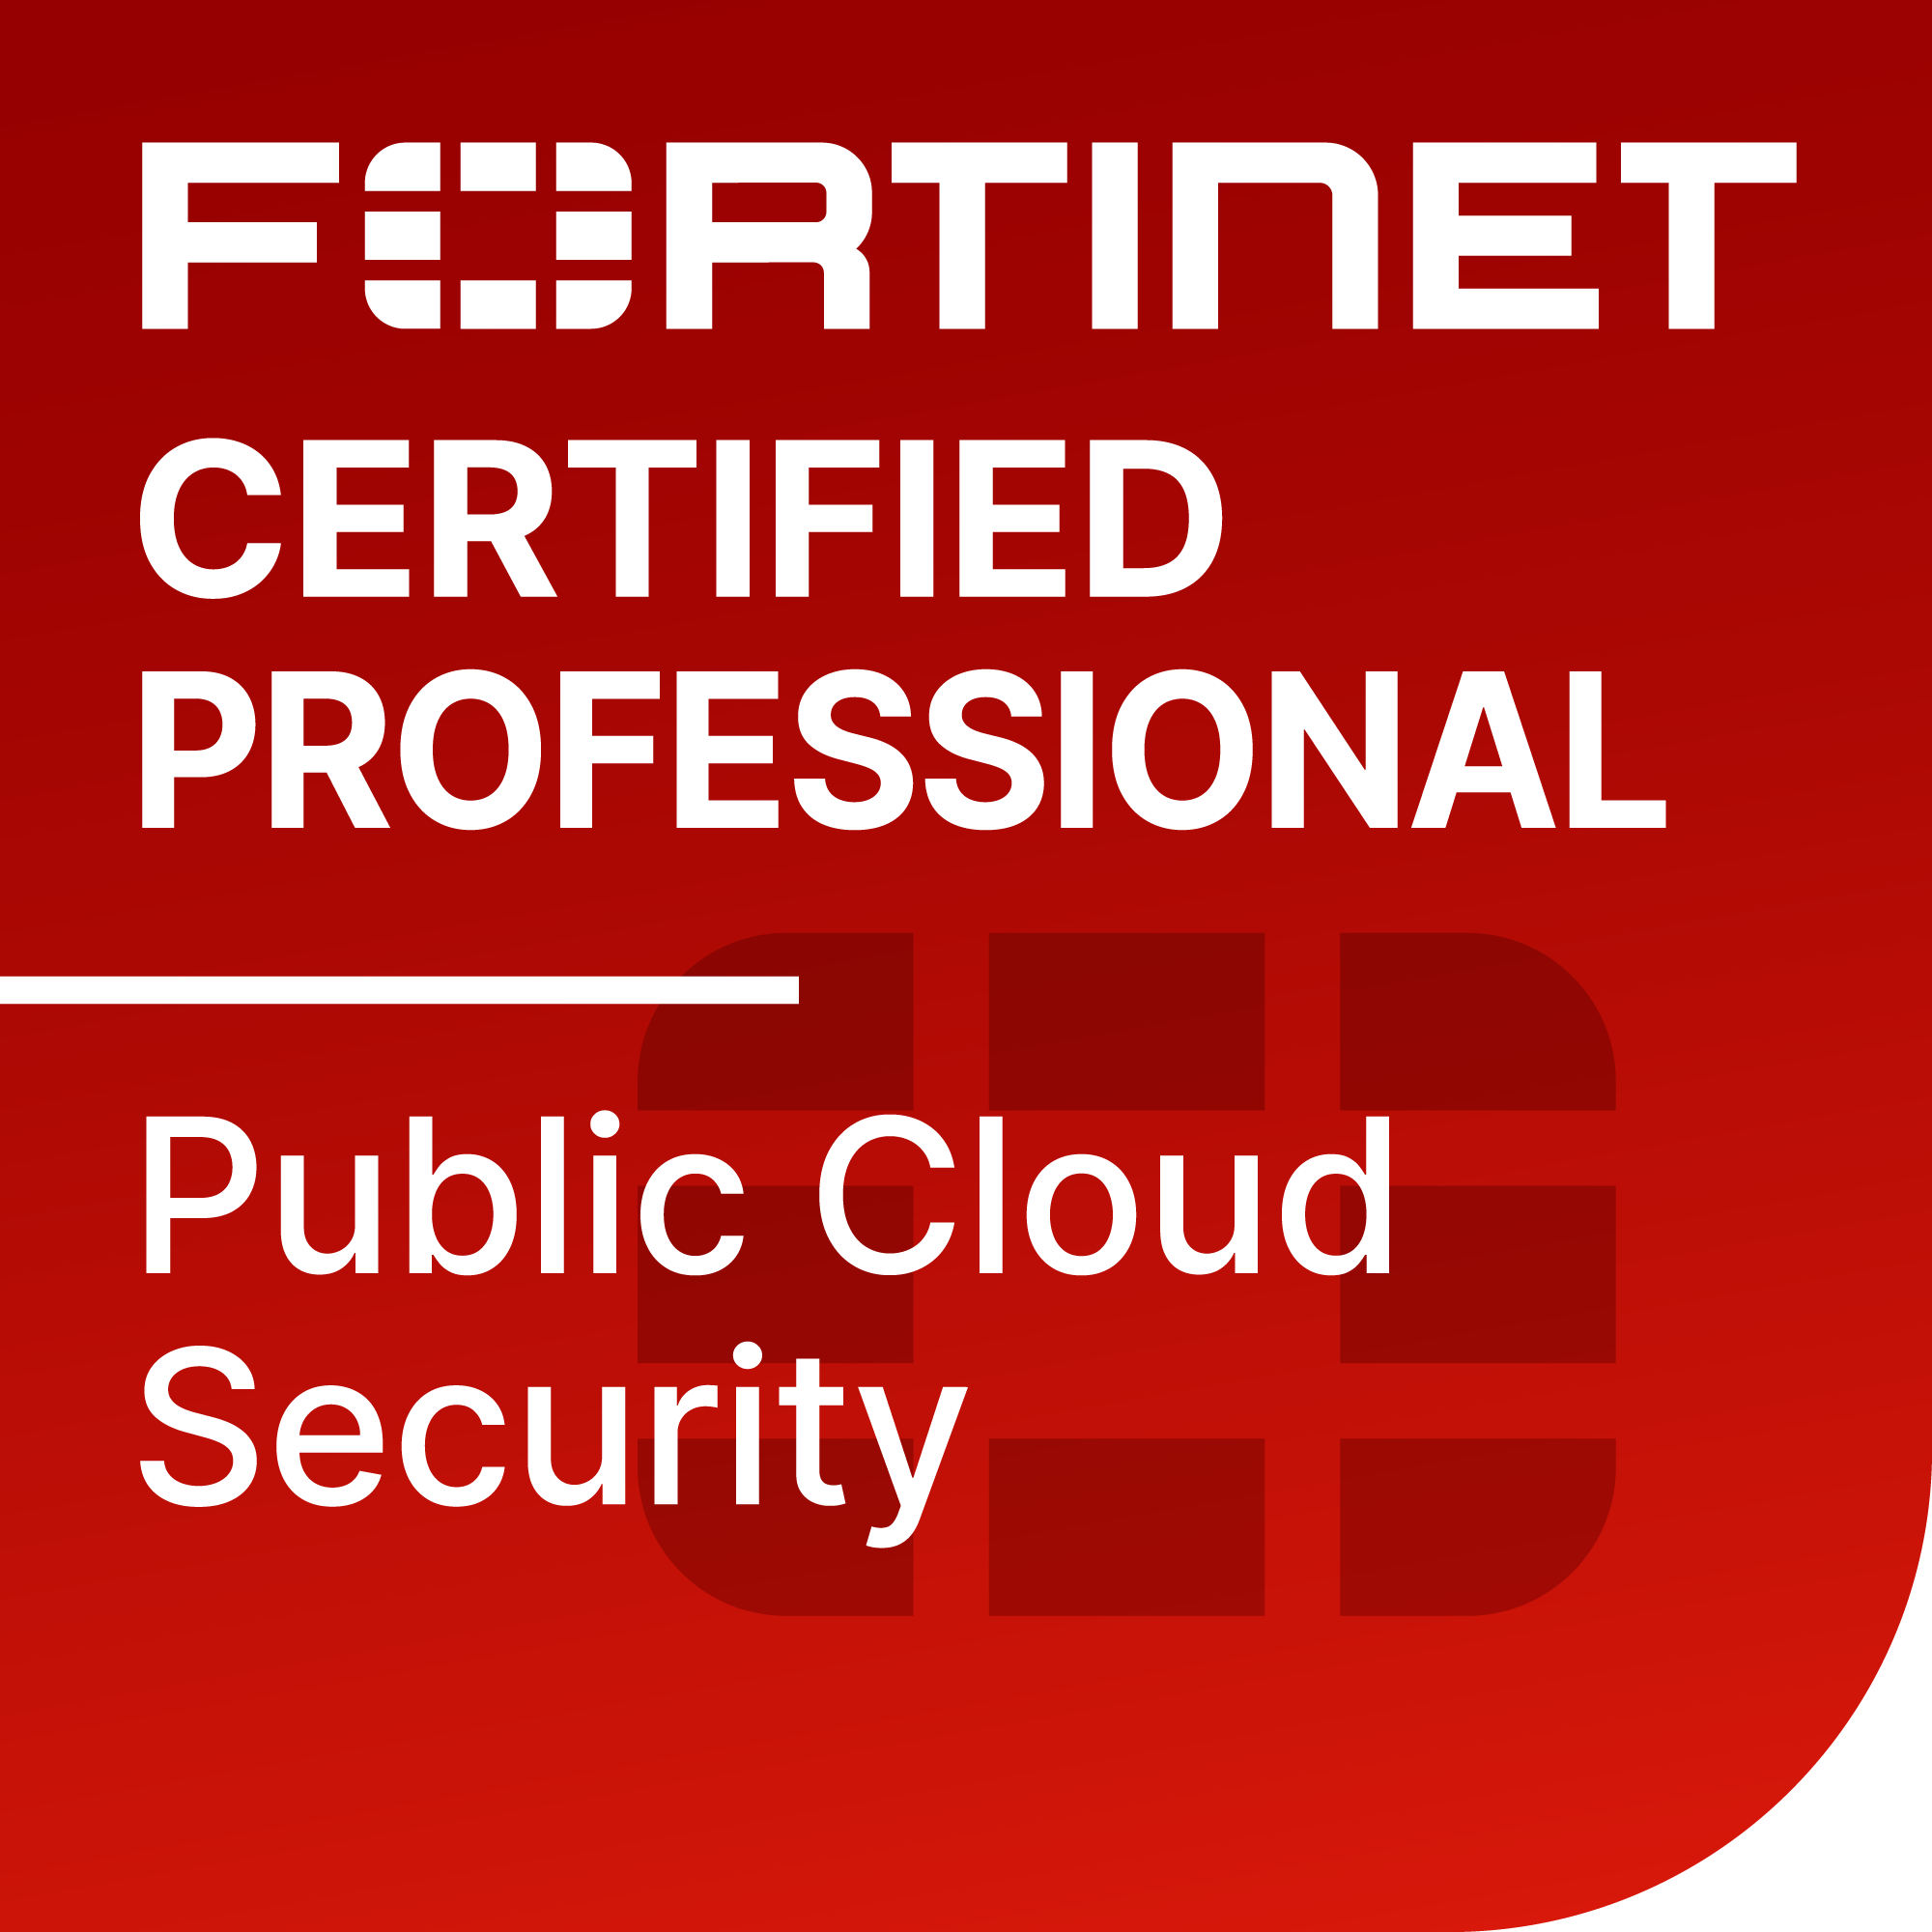 Fortinet Certified Professional, Public Cloud Security